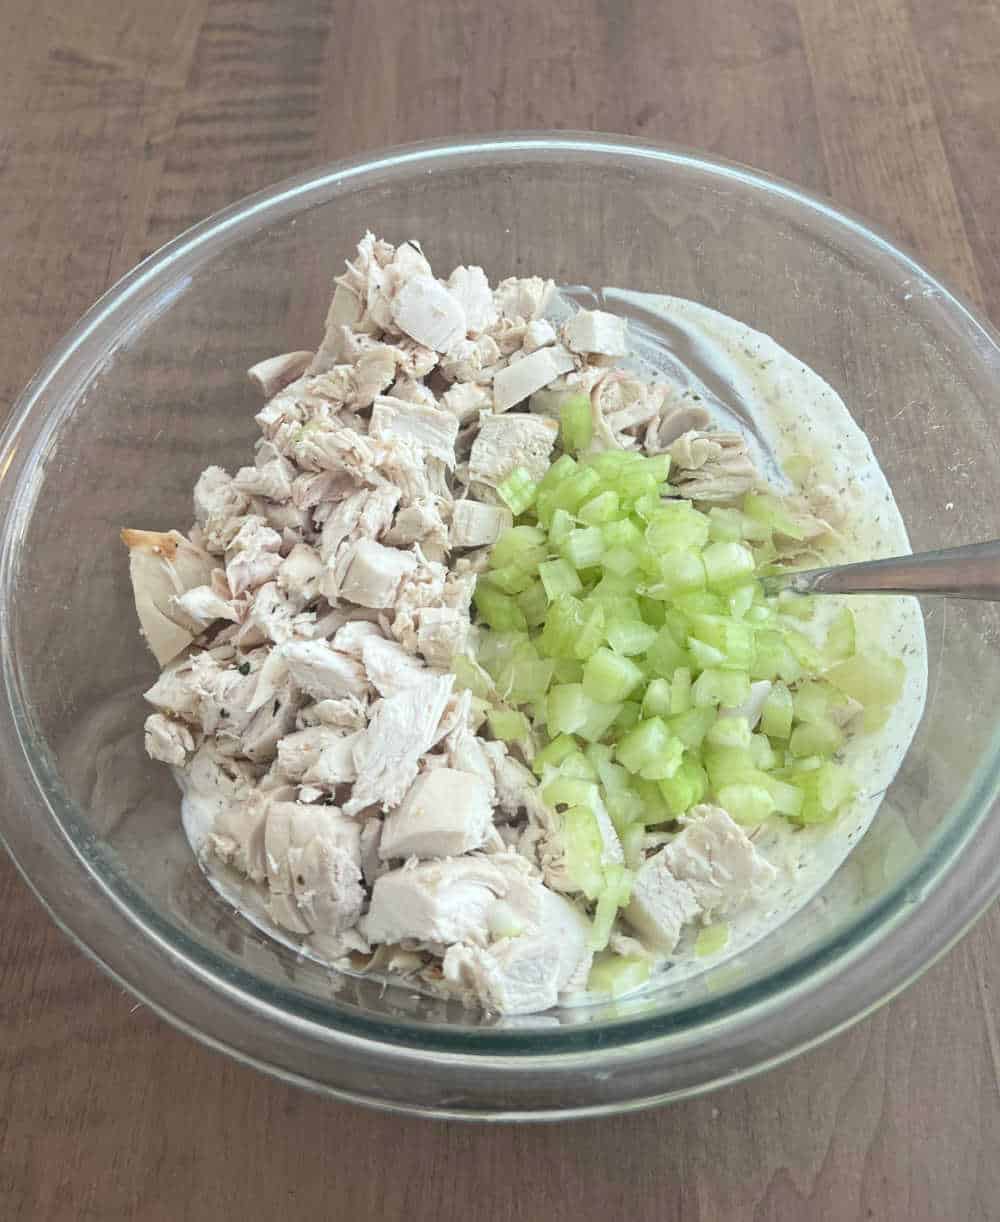 mix chicken and celery into dressing.